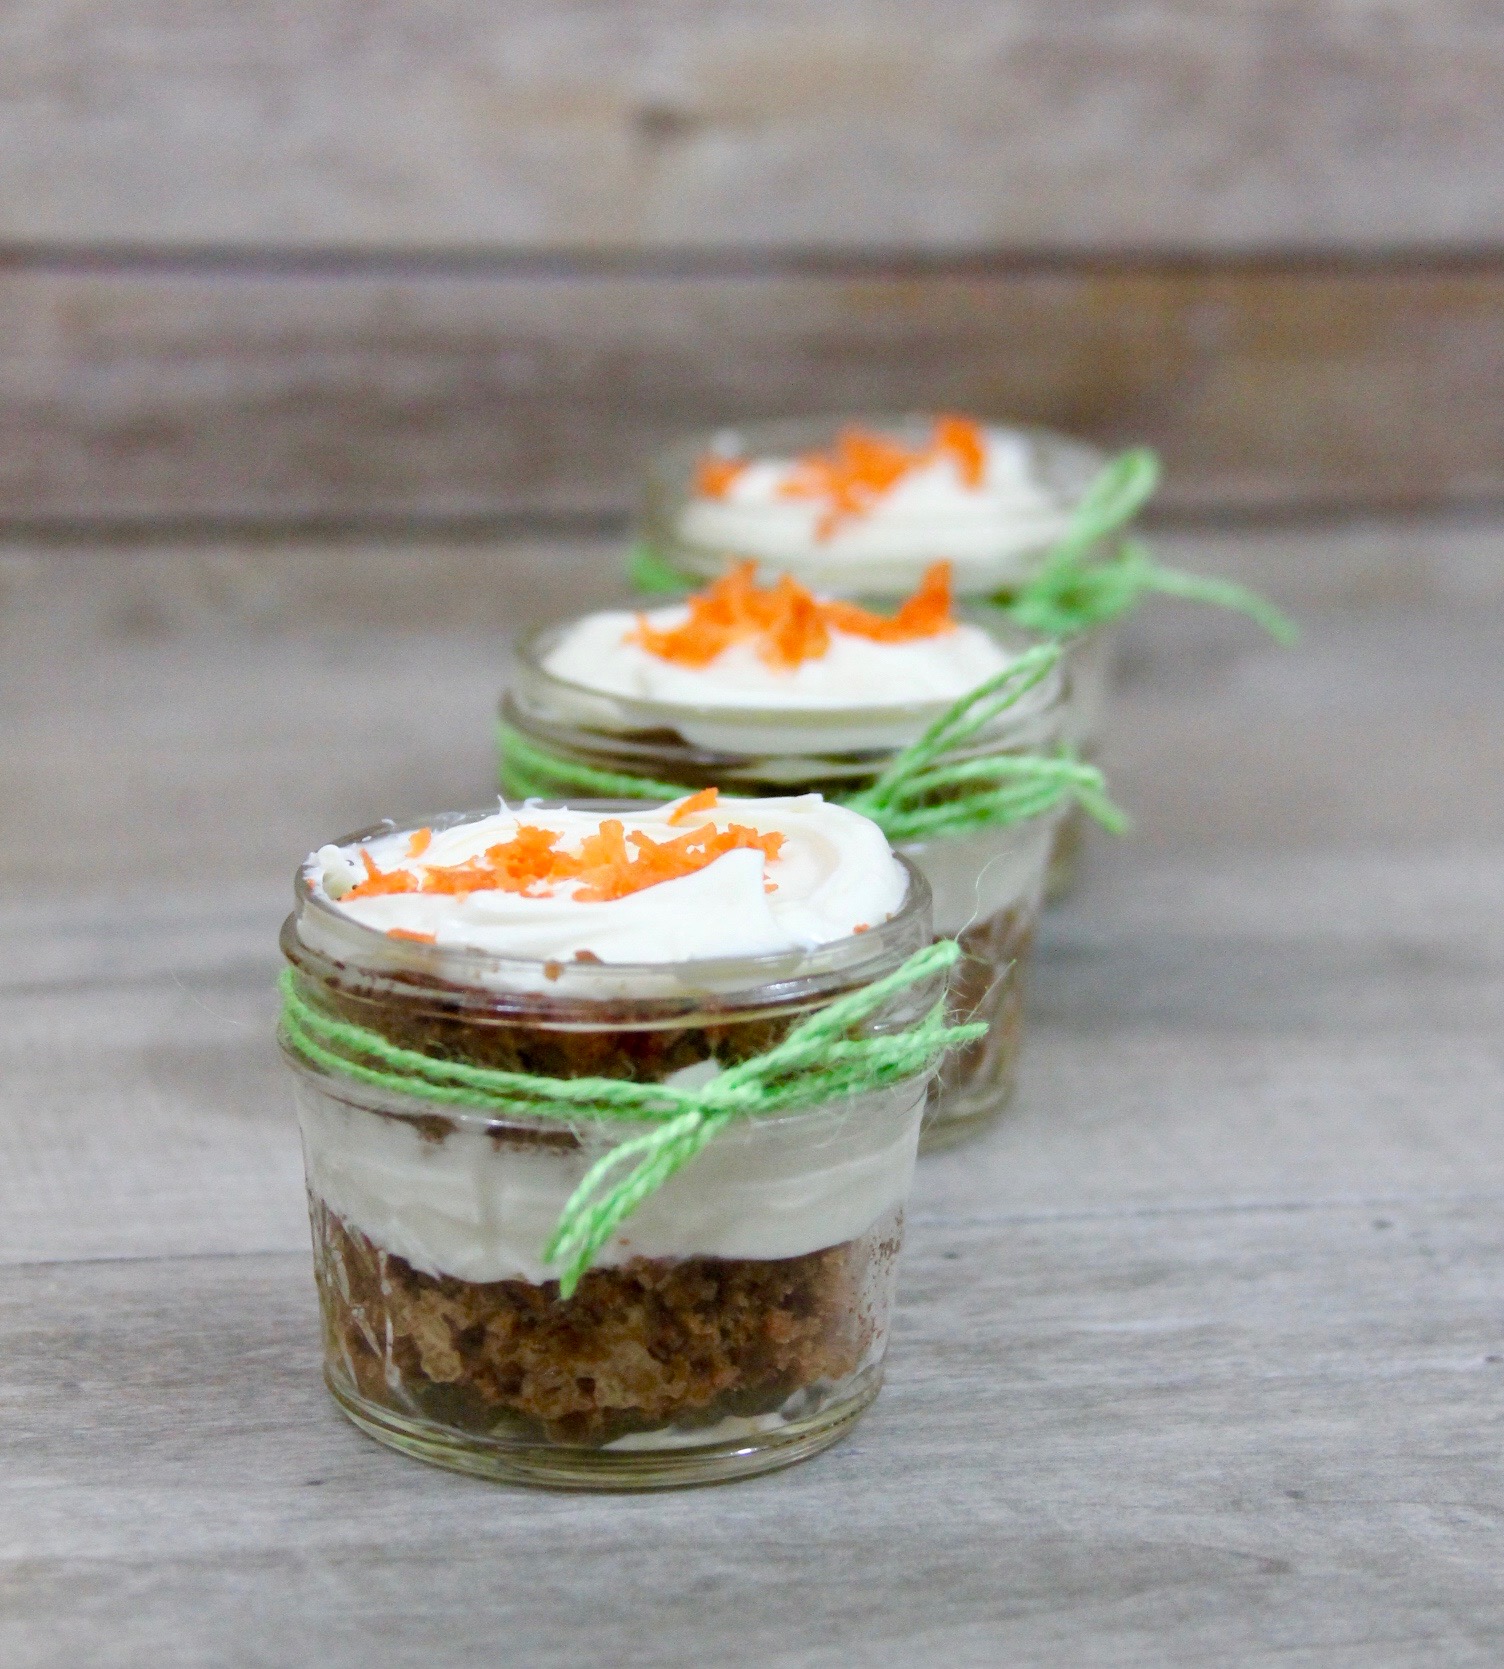 Carrot cake tres leches in a jar, easter brunch ideas at home